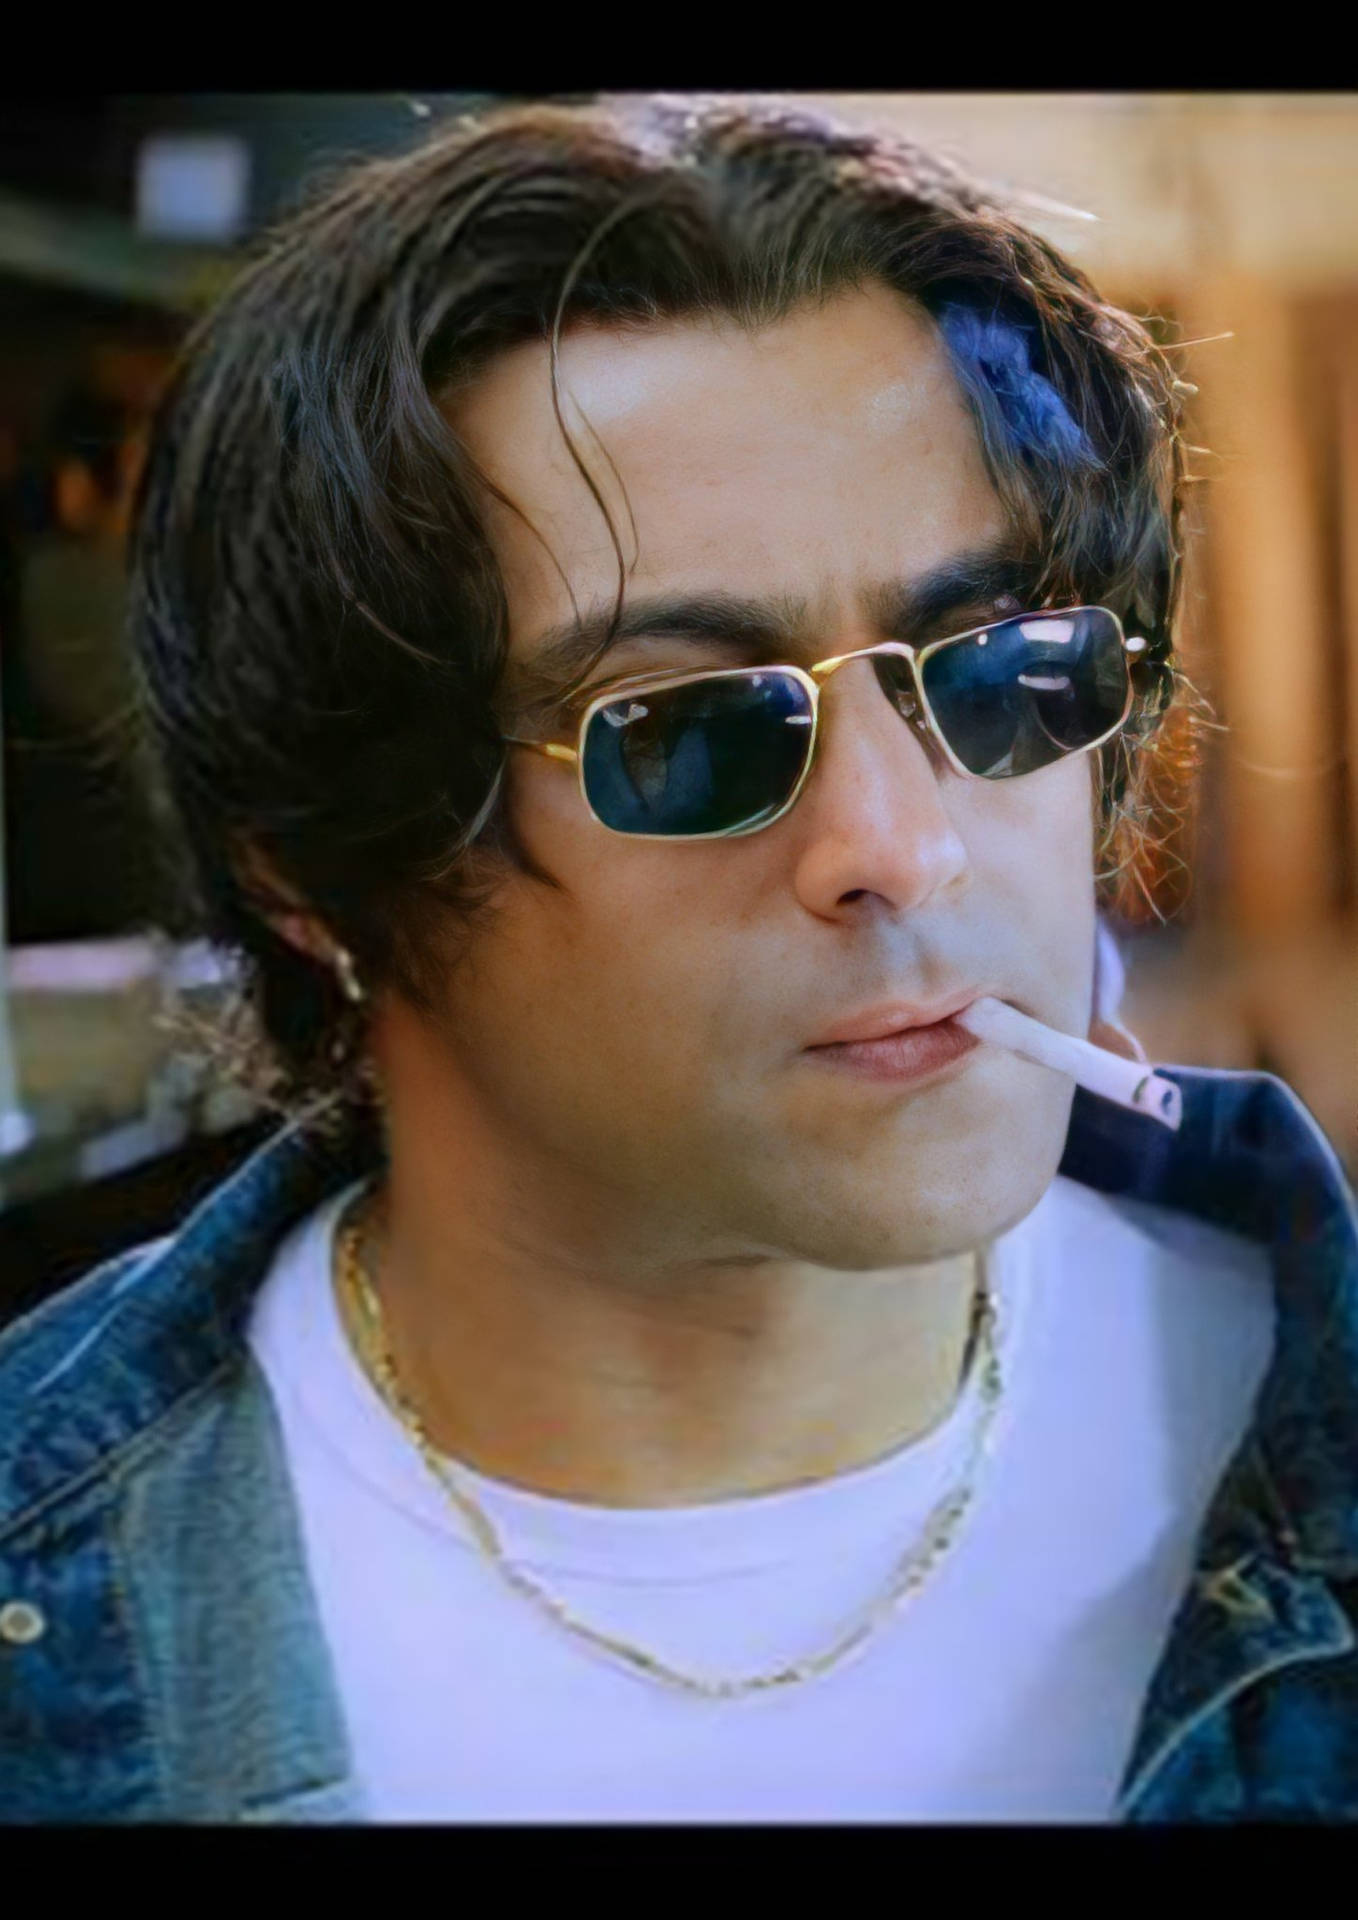 Tere Naam Lead Actor With Shades Wallpaper